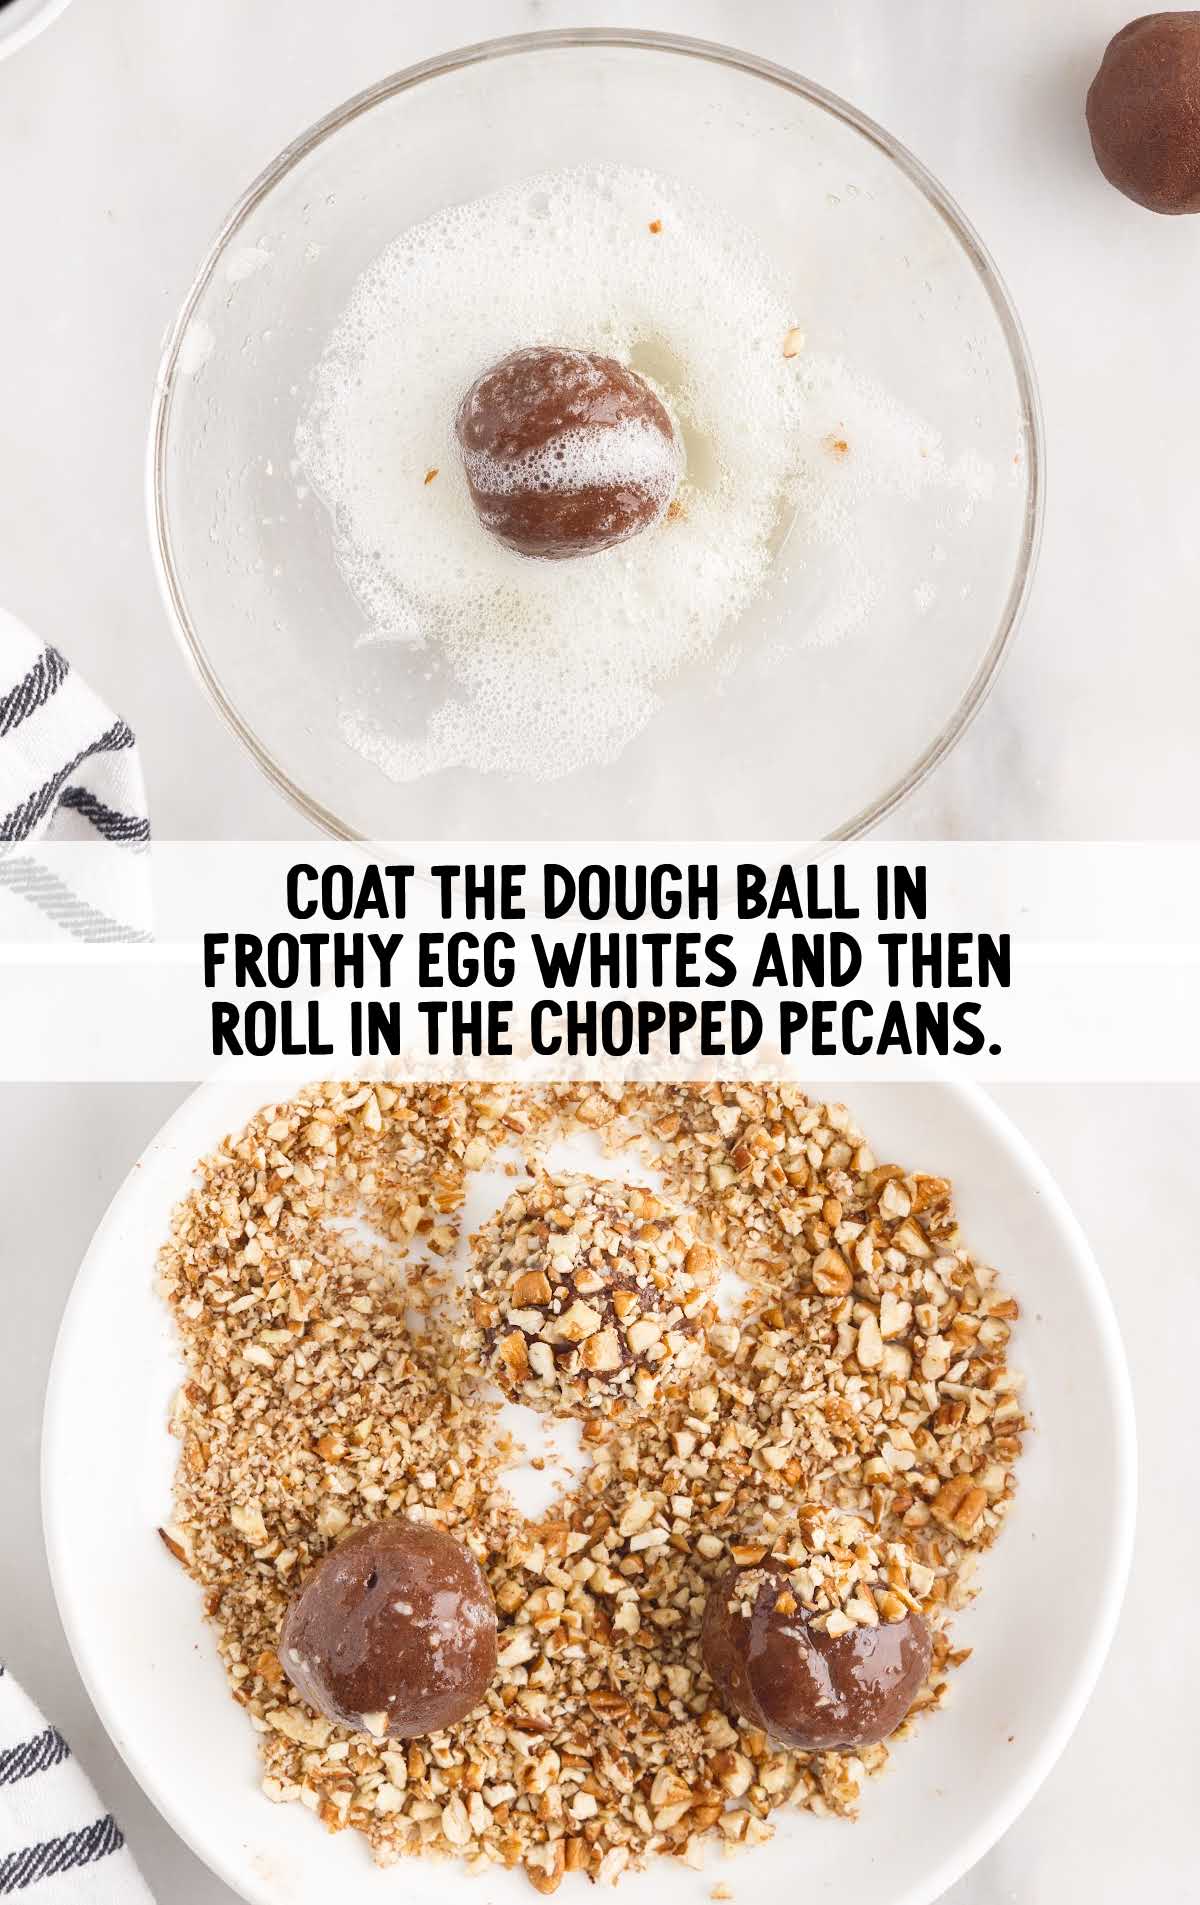 dough ball coated with frothy egg whites and chopped pecans